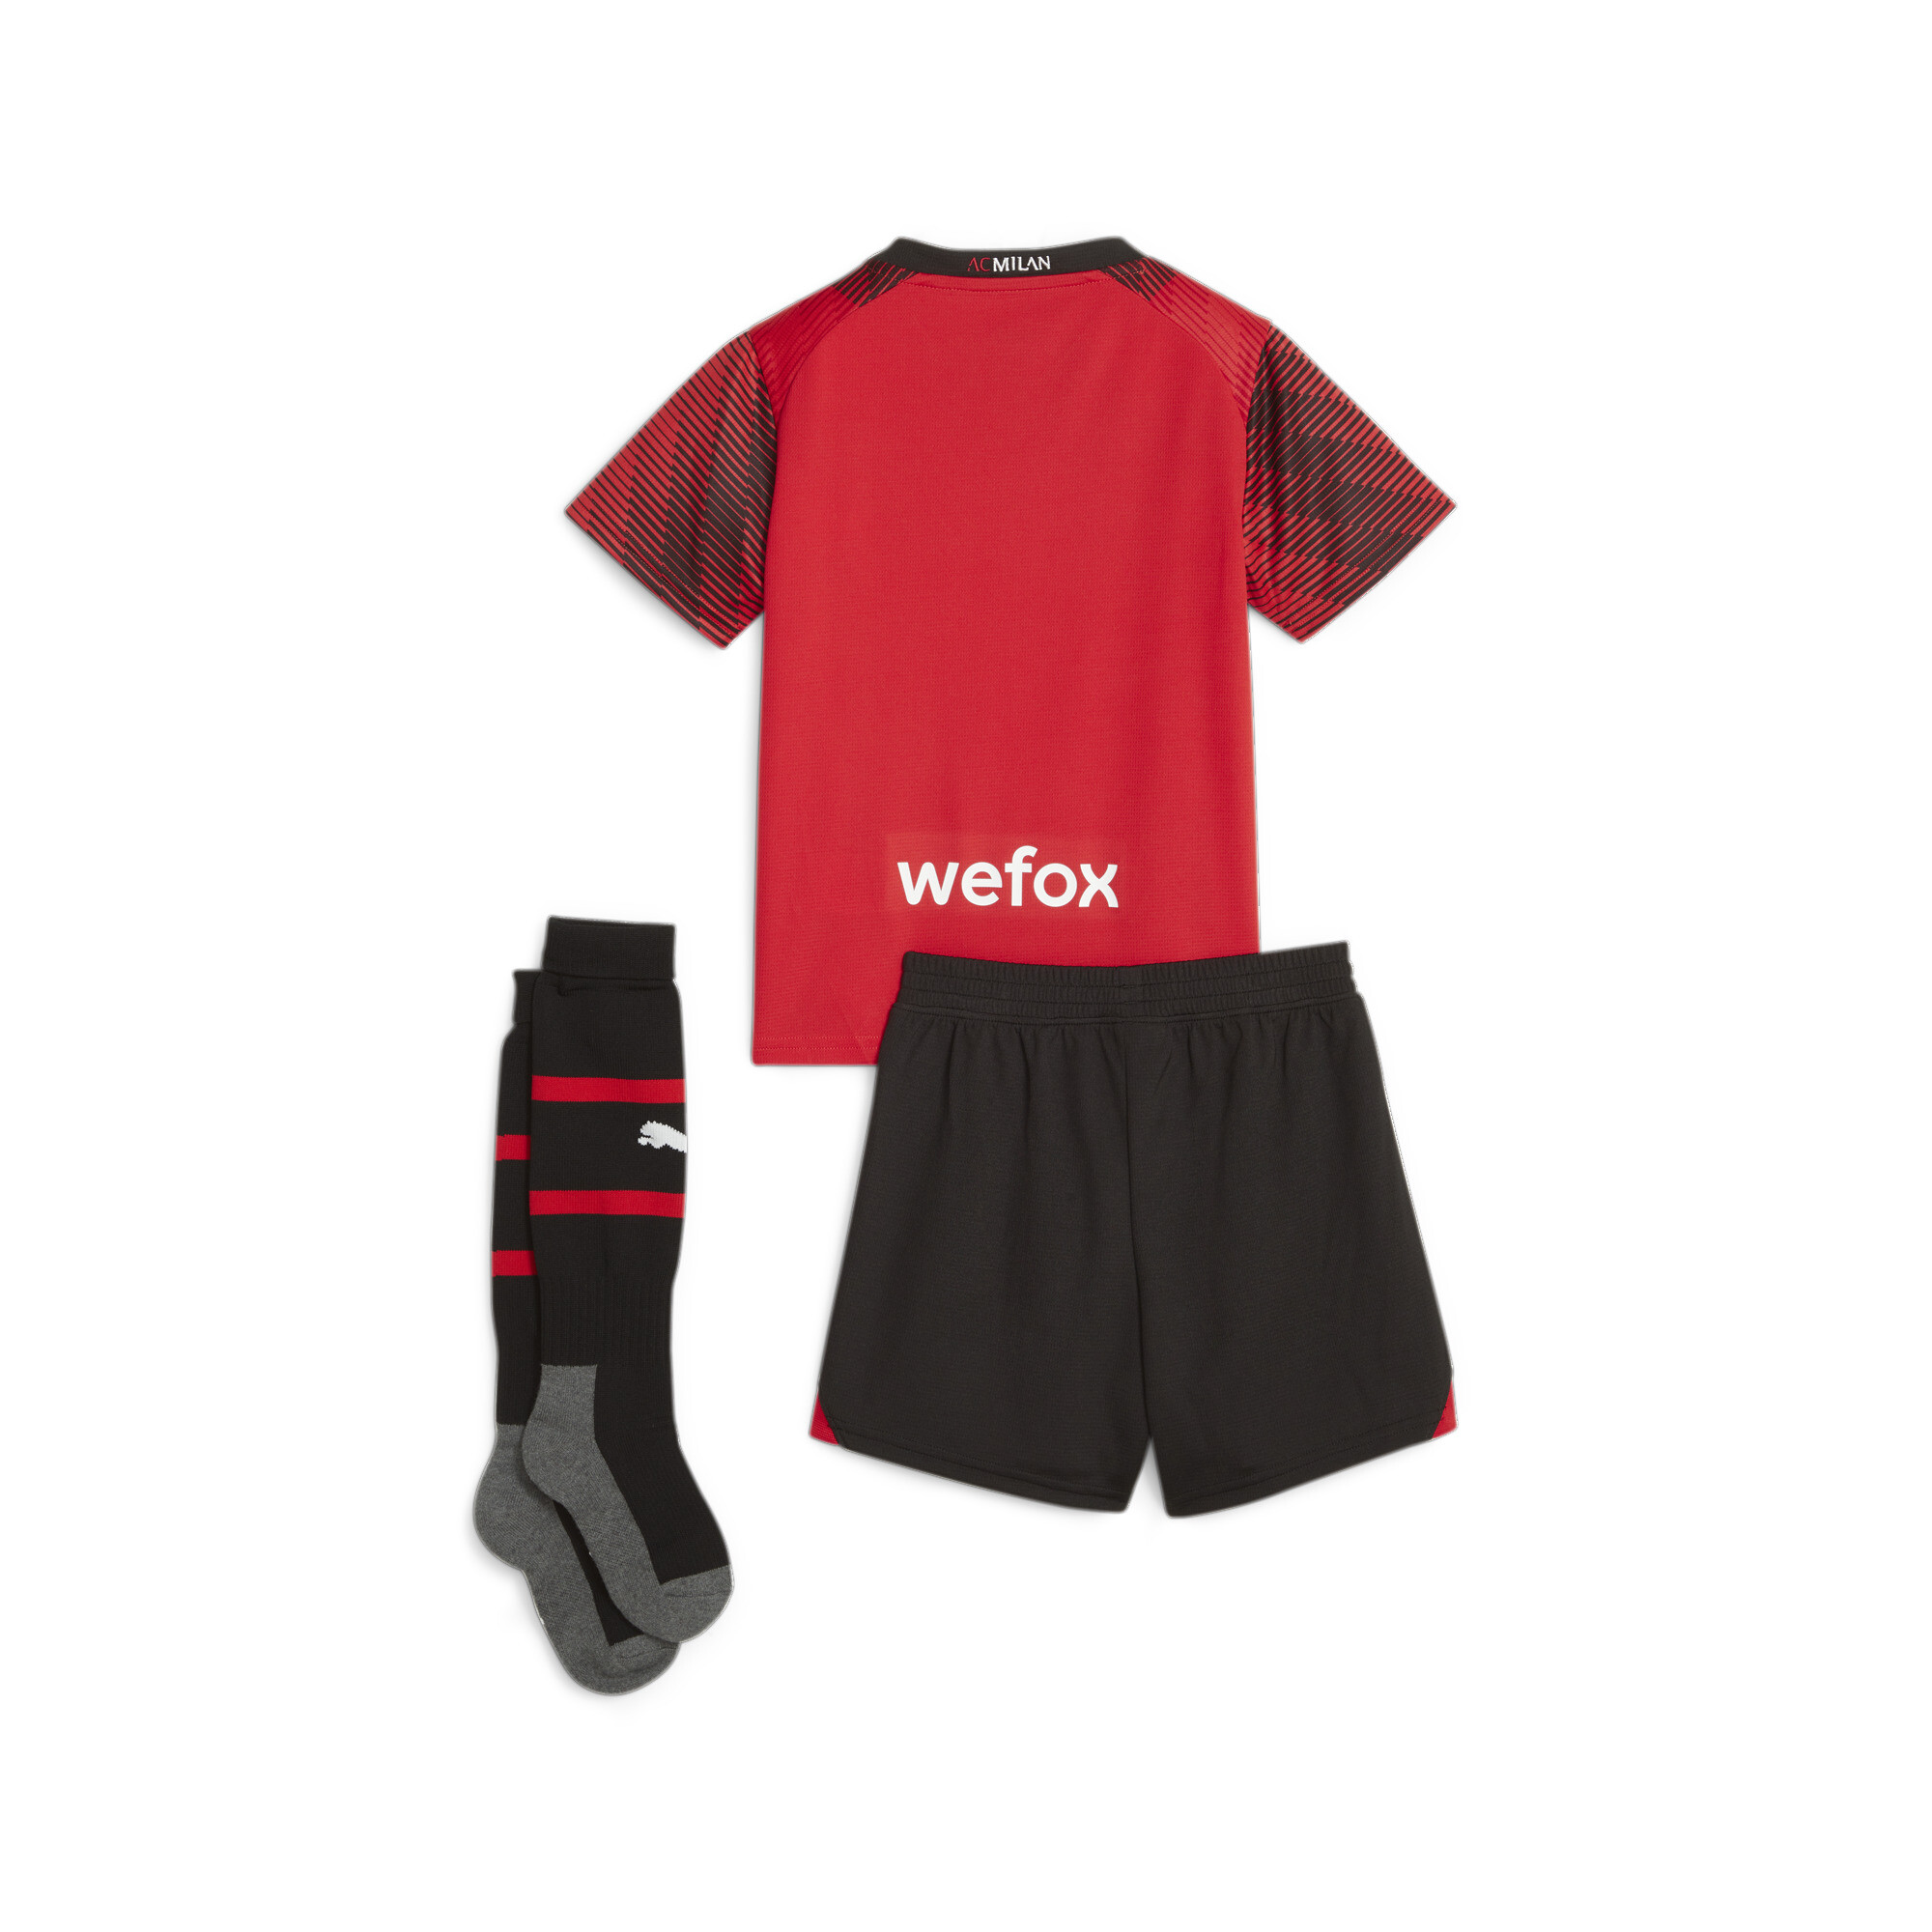 PUMA A.C. Milan 23/24 Home Mini Kit In Red, Size 5-6 Youth